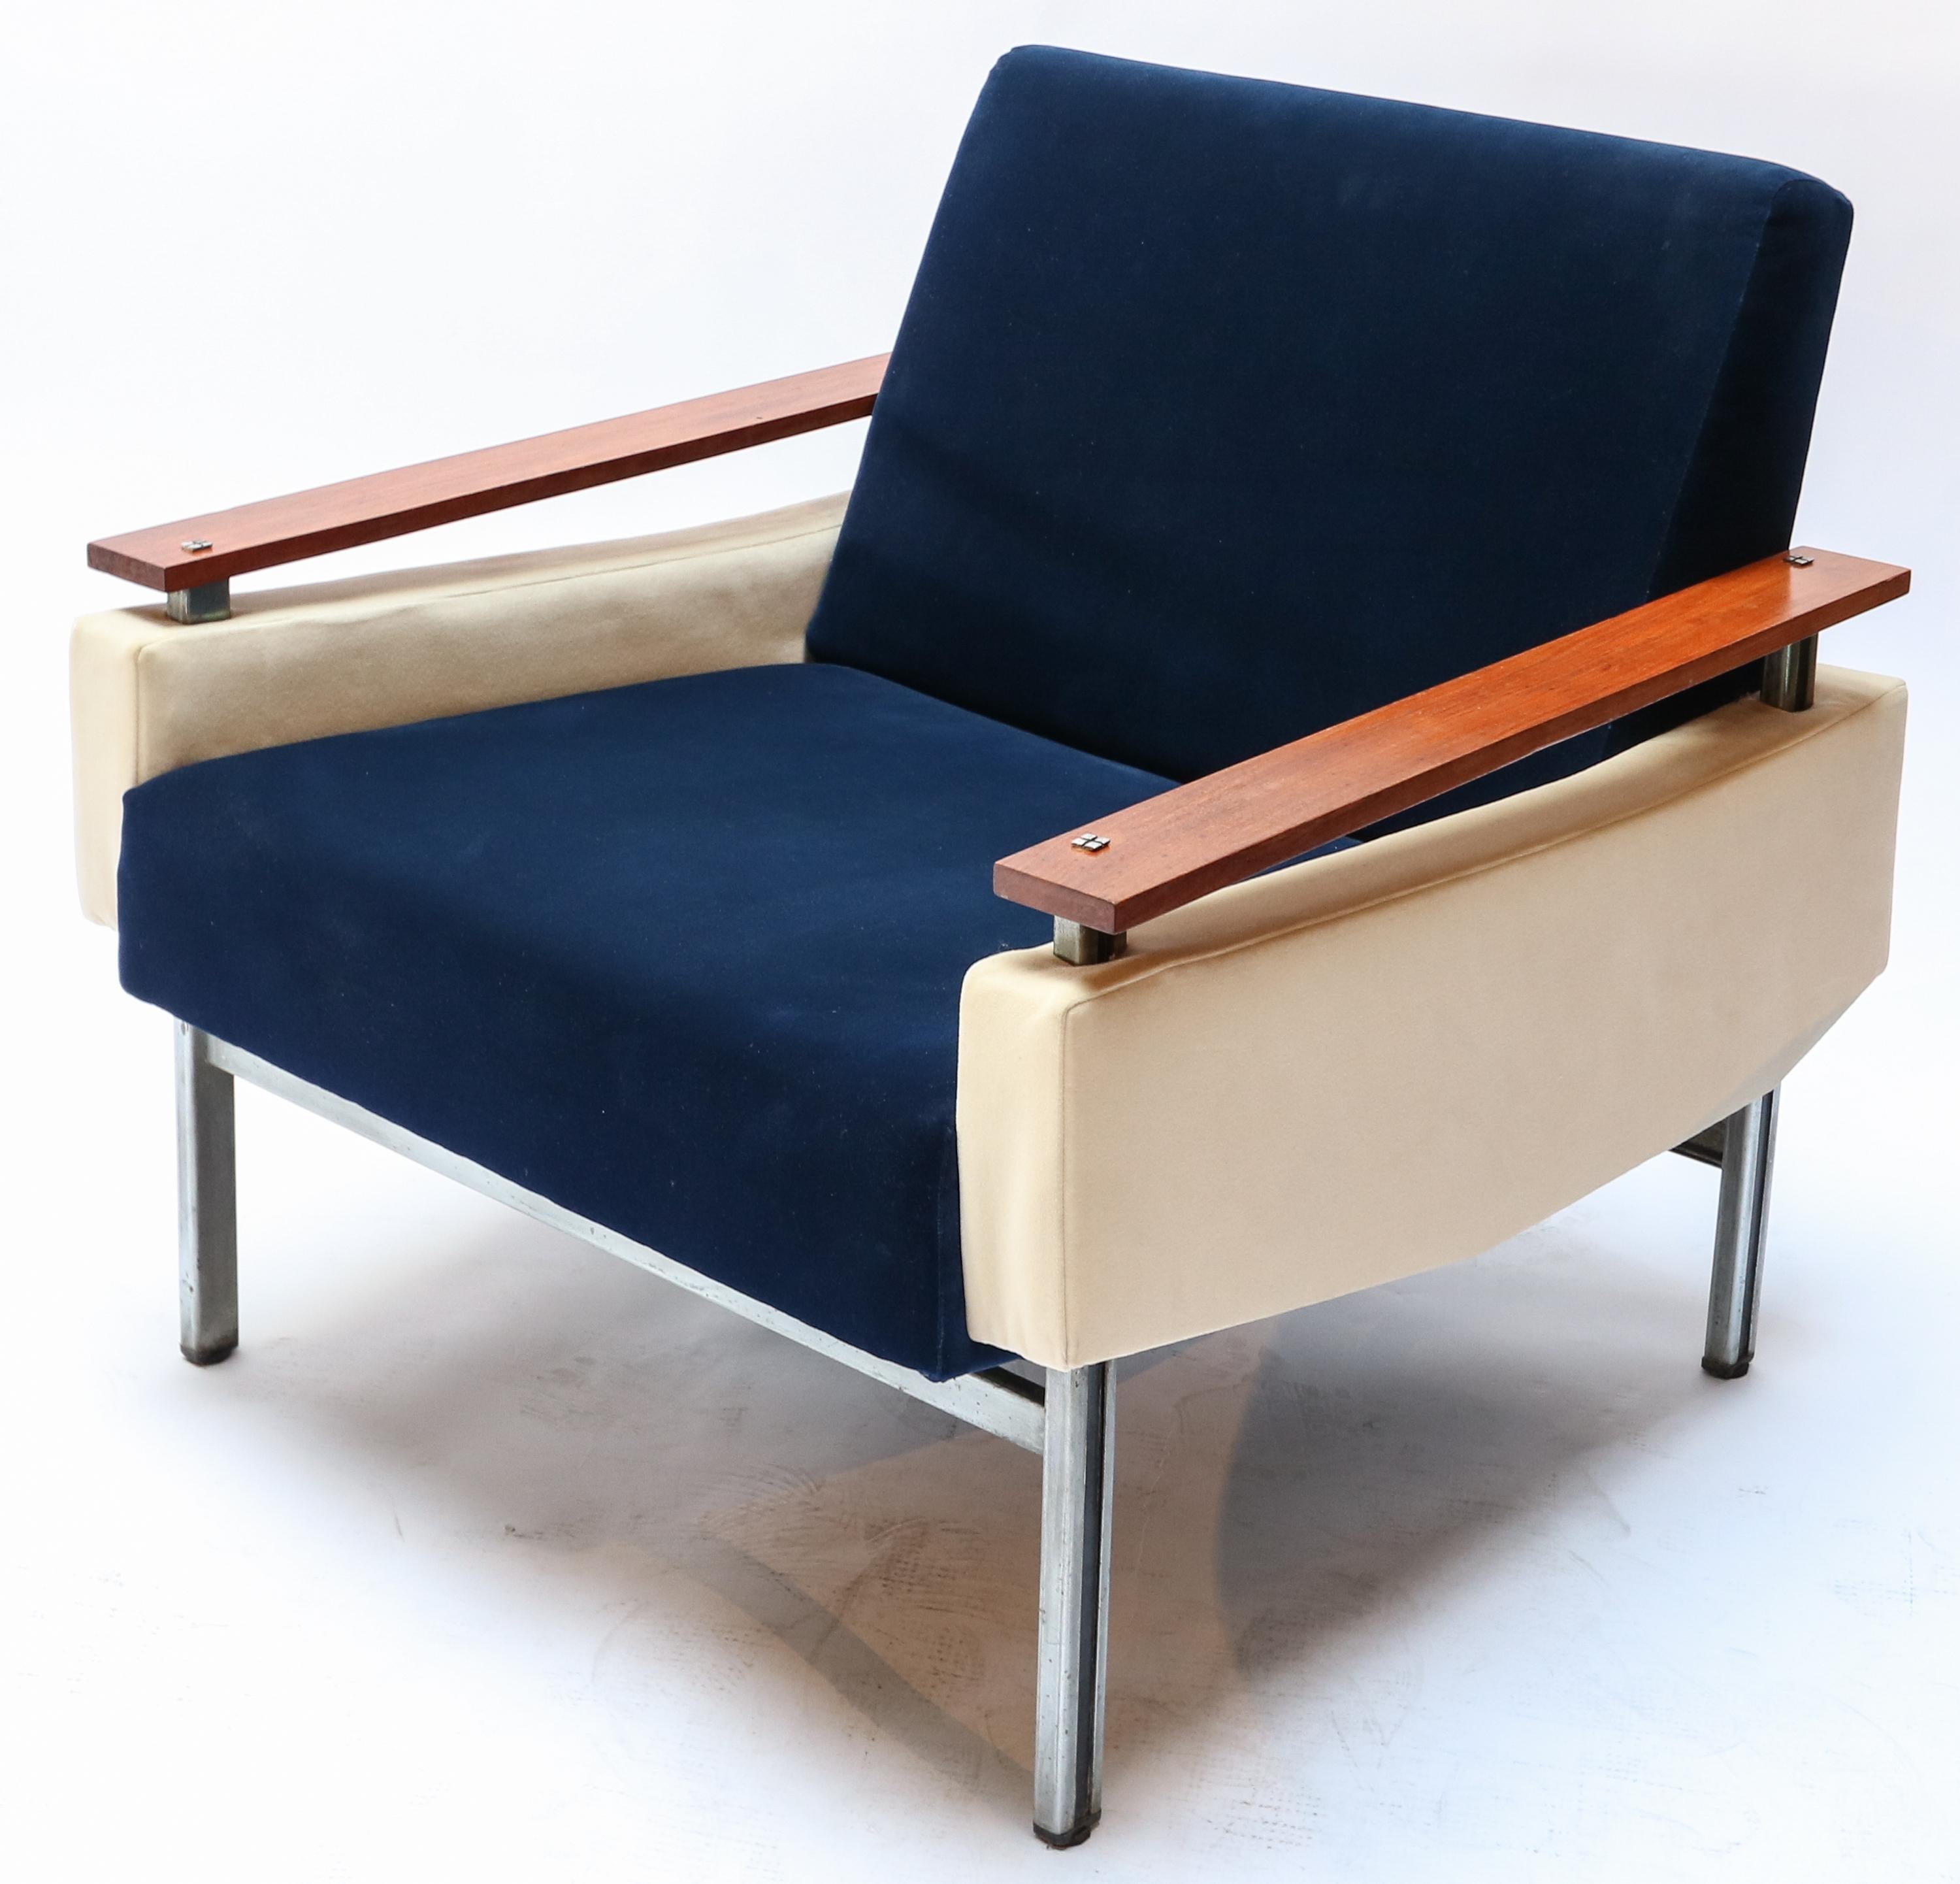 Pair of 1950s Brazilian armchairs with caviuna wood arms and upholstered with blue and beige velvet on a chrome frame.